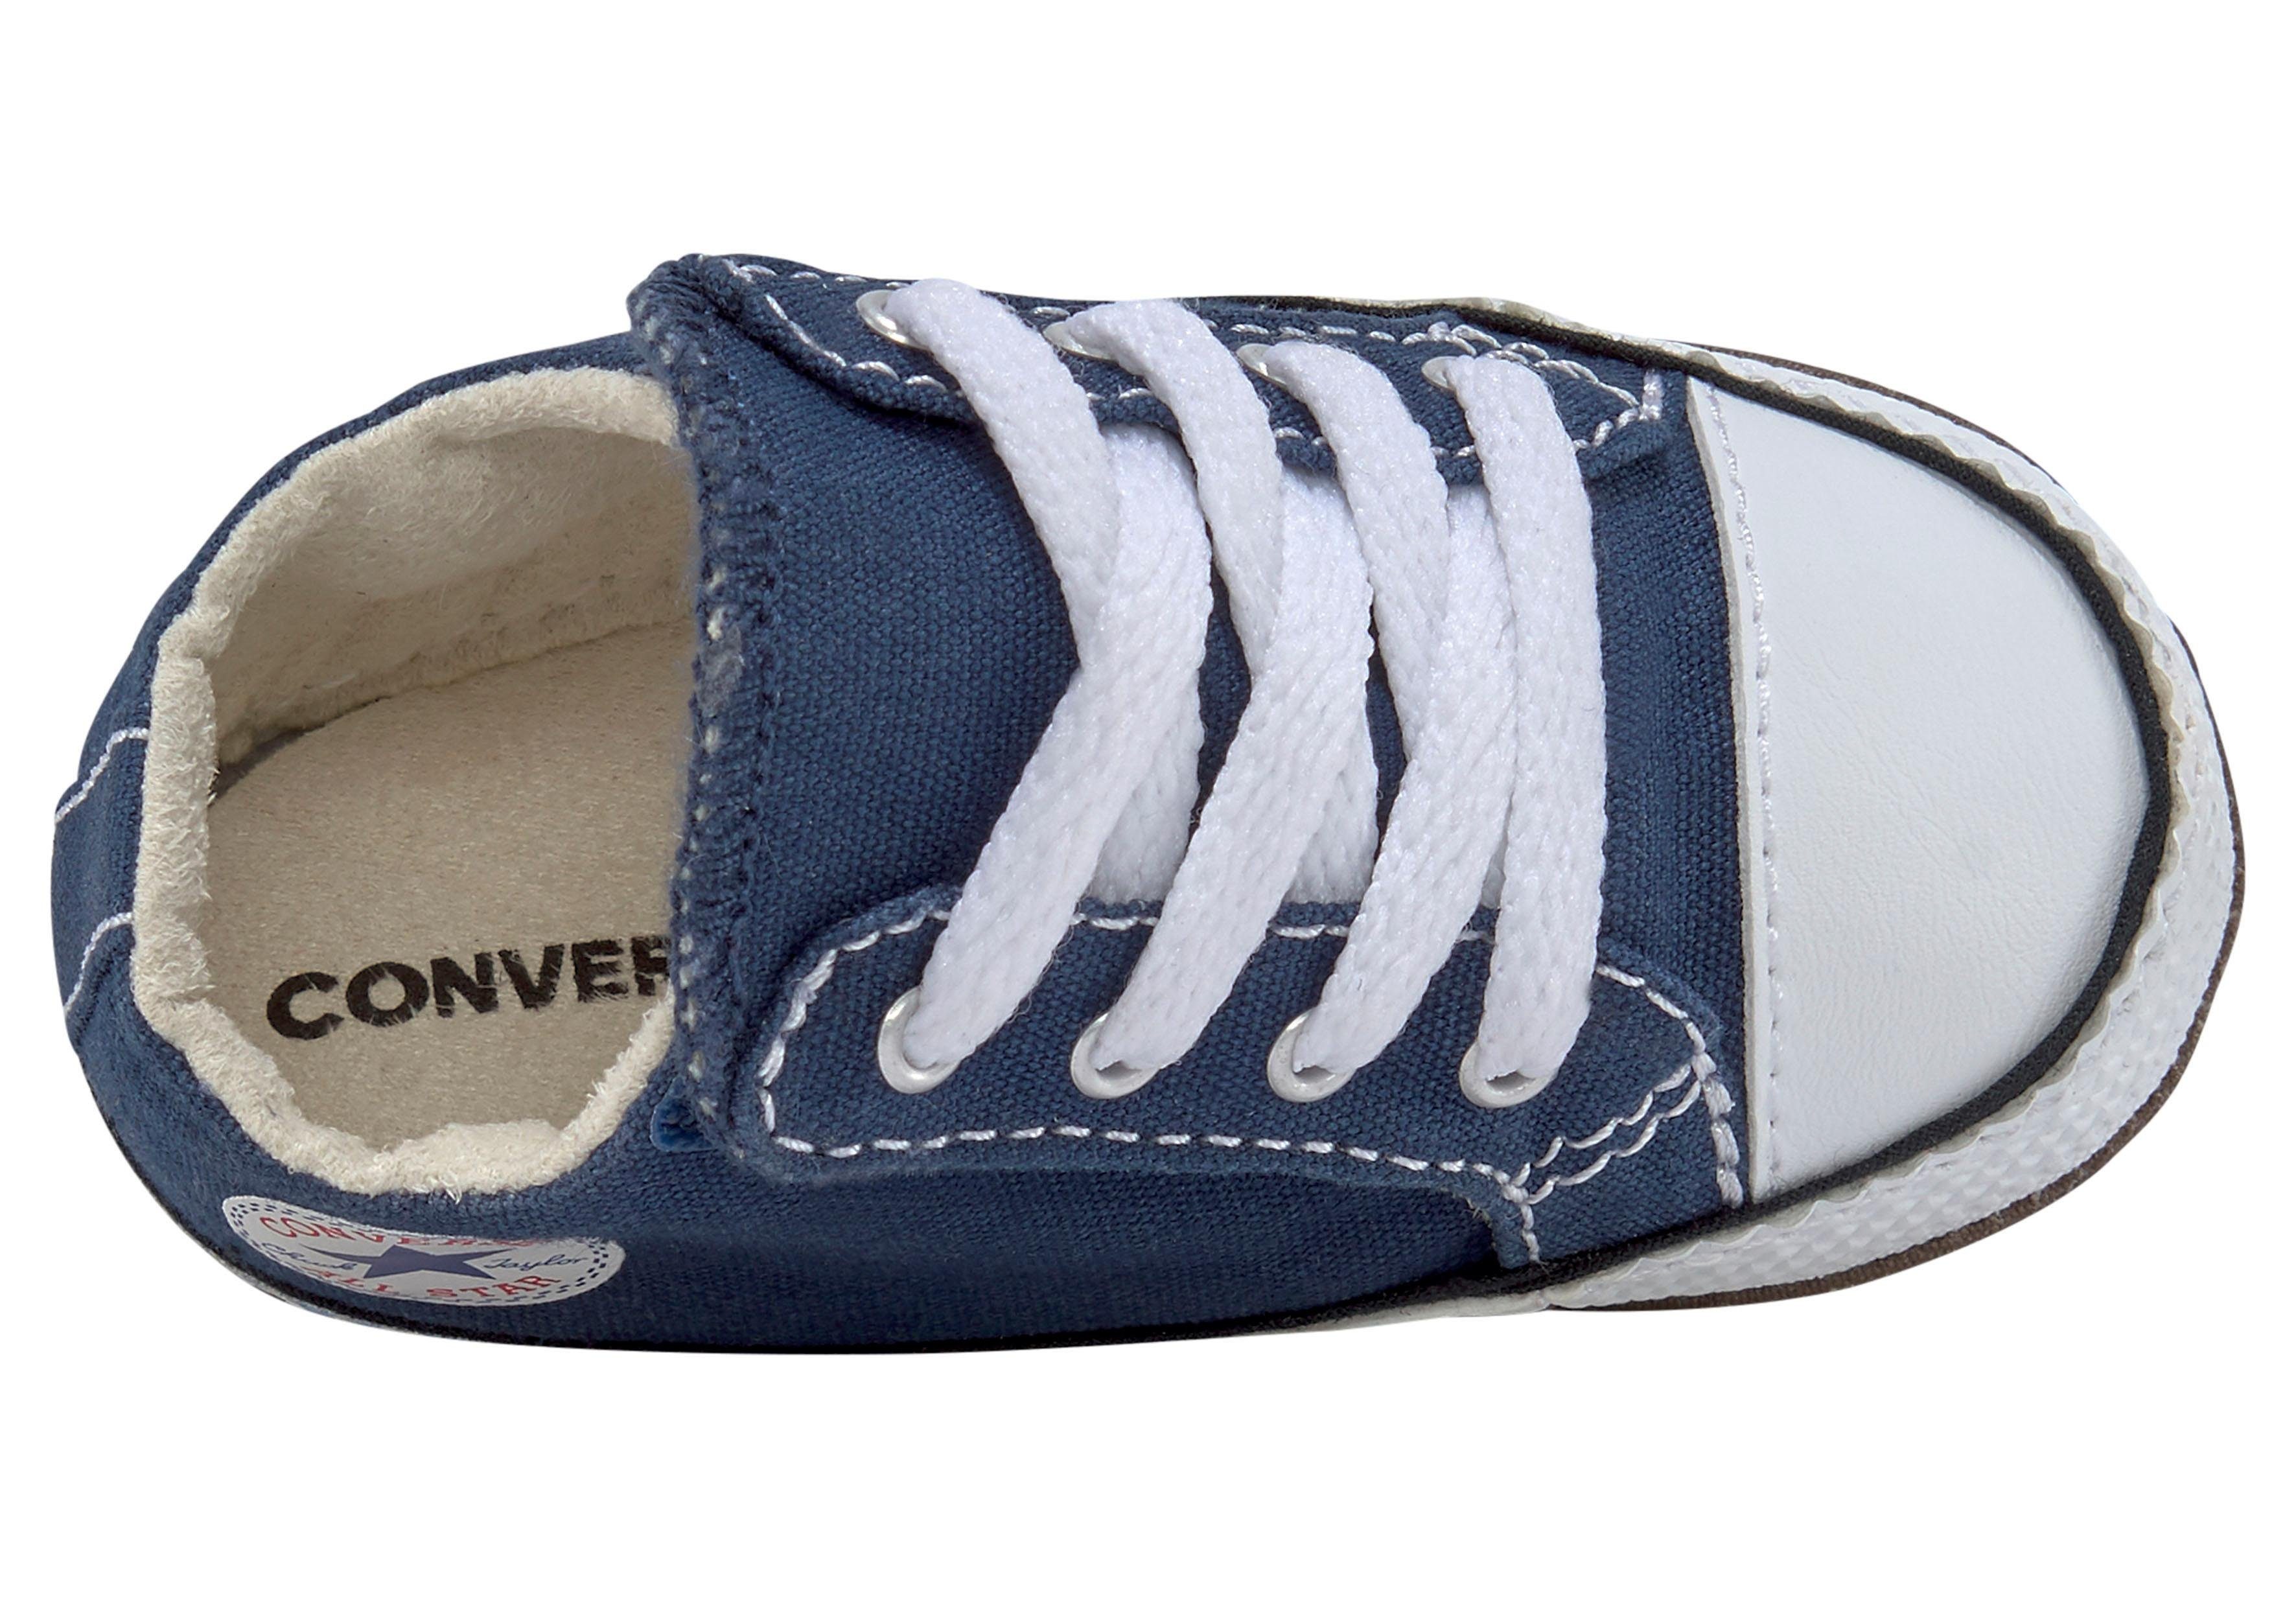 Babys für All Canvas Color-Mid NAVY-NATURAL-IVORY-WHITE Cribster Star Taylor Chuck Sneaker Converse Kinder